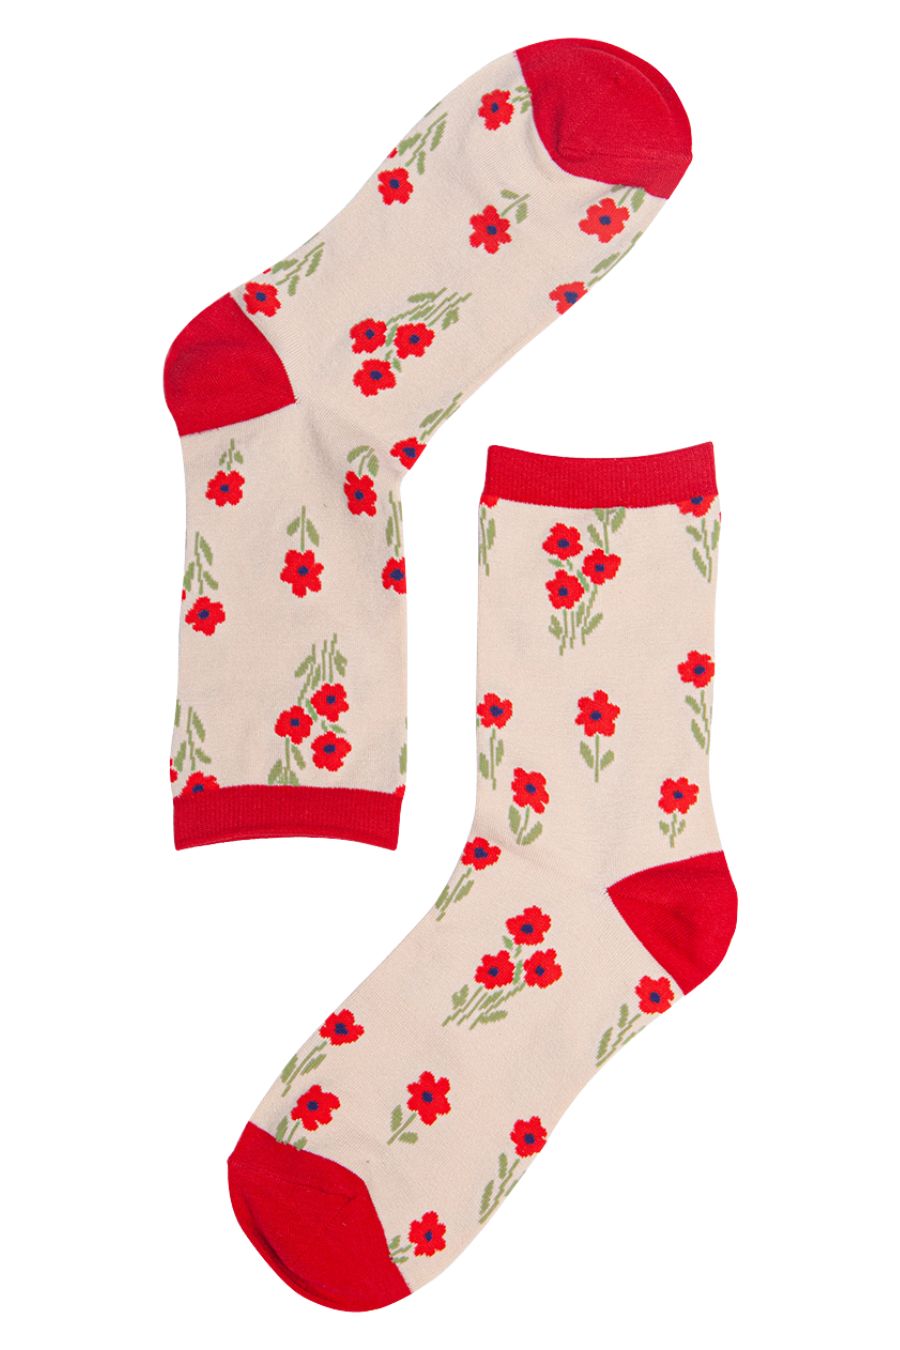 cream socks with a ditsy red wildflower print